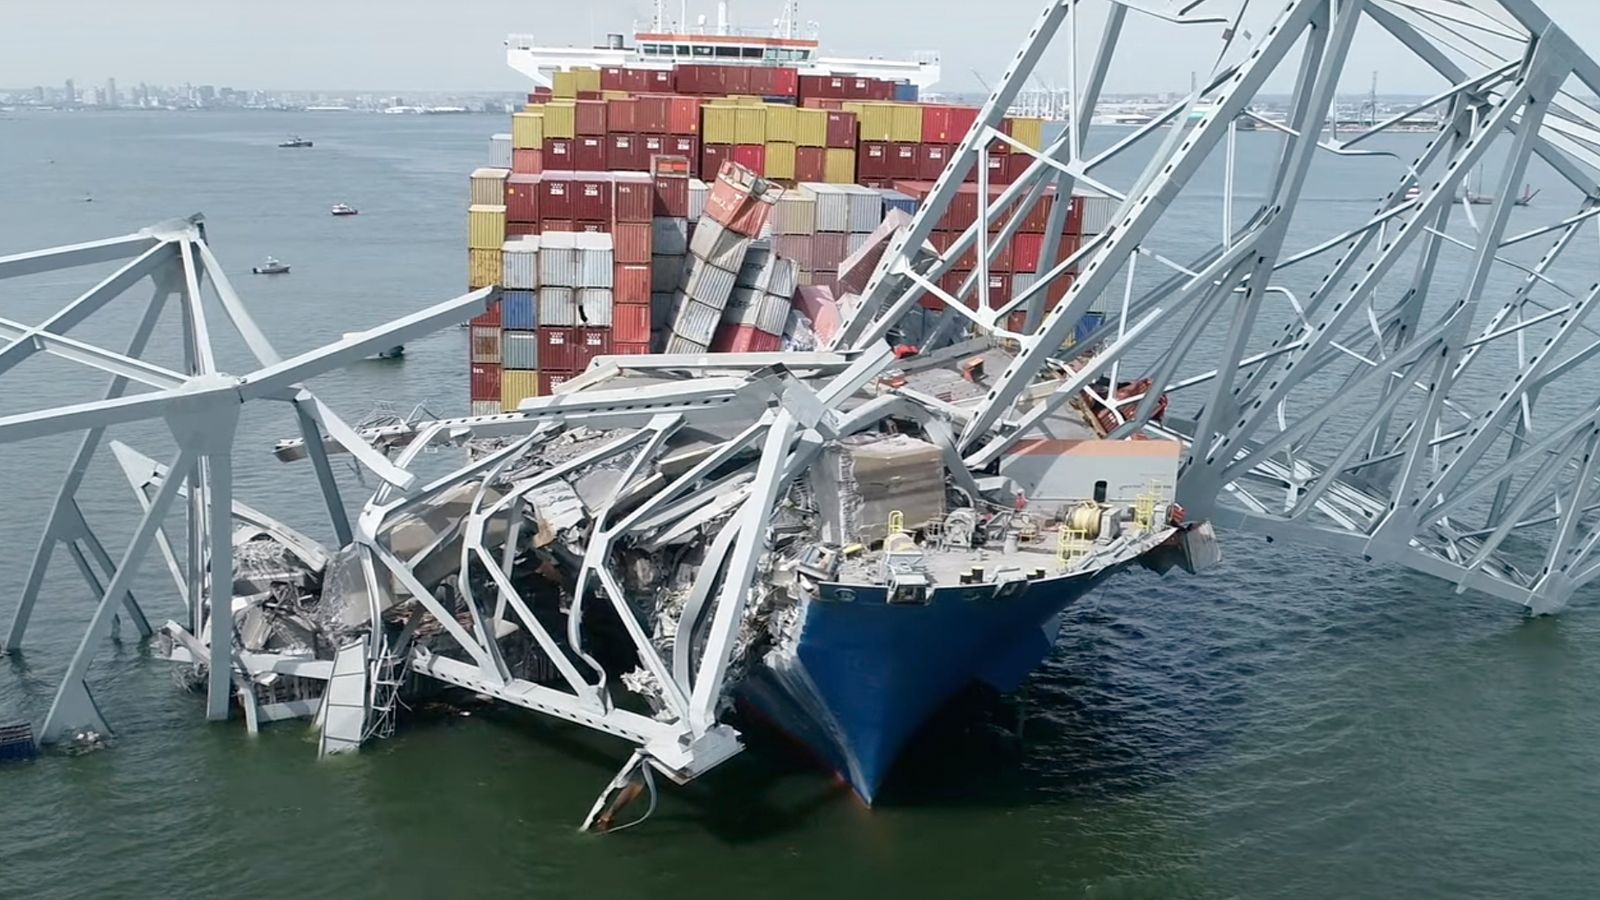 Baltimore has 'very long road ahead' after bridge disaster - as update given on ship crew